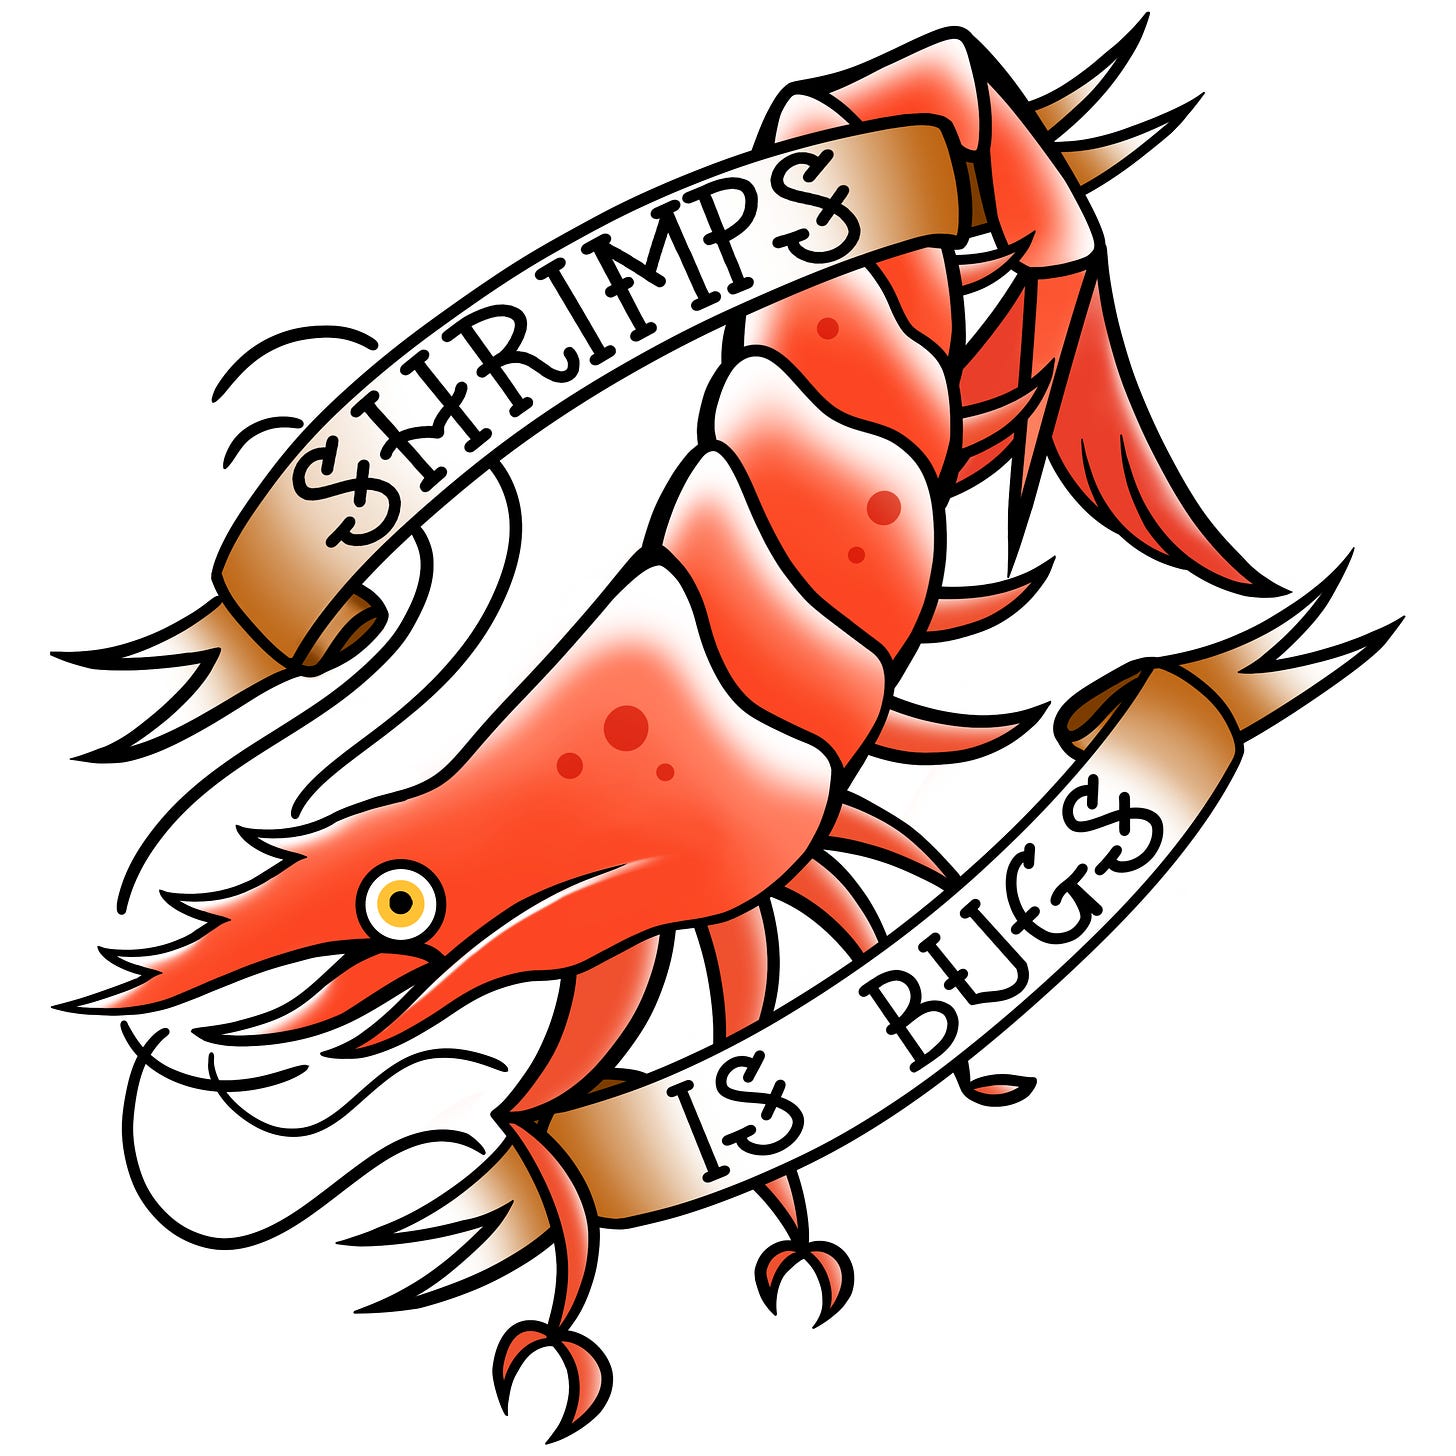 A stylized shrimp with banners above and below reading, of course, “SHRIMPS IS BUGS”